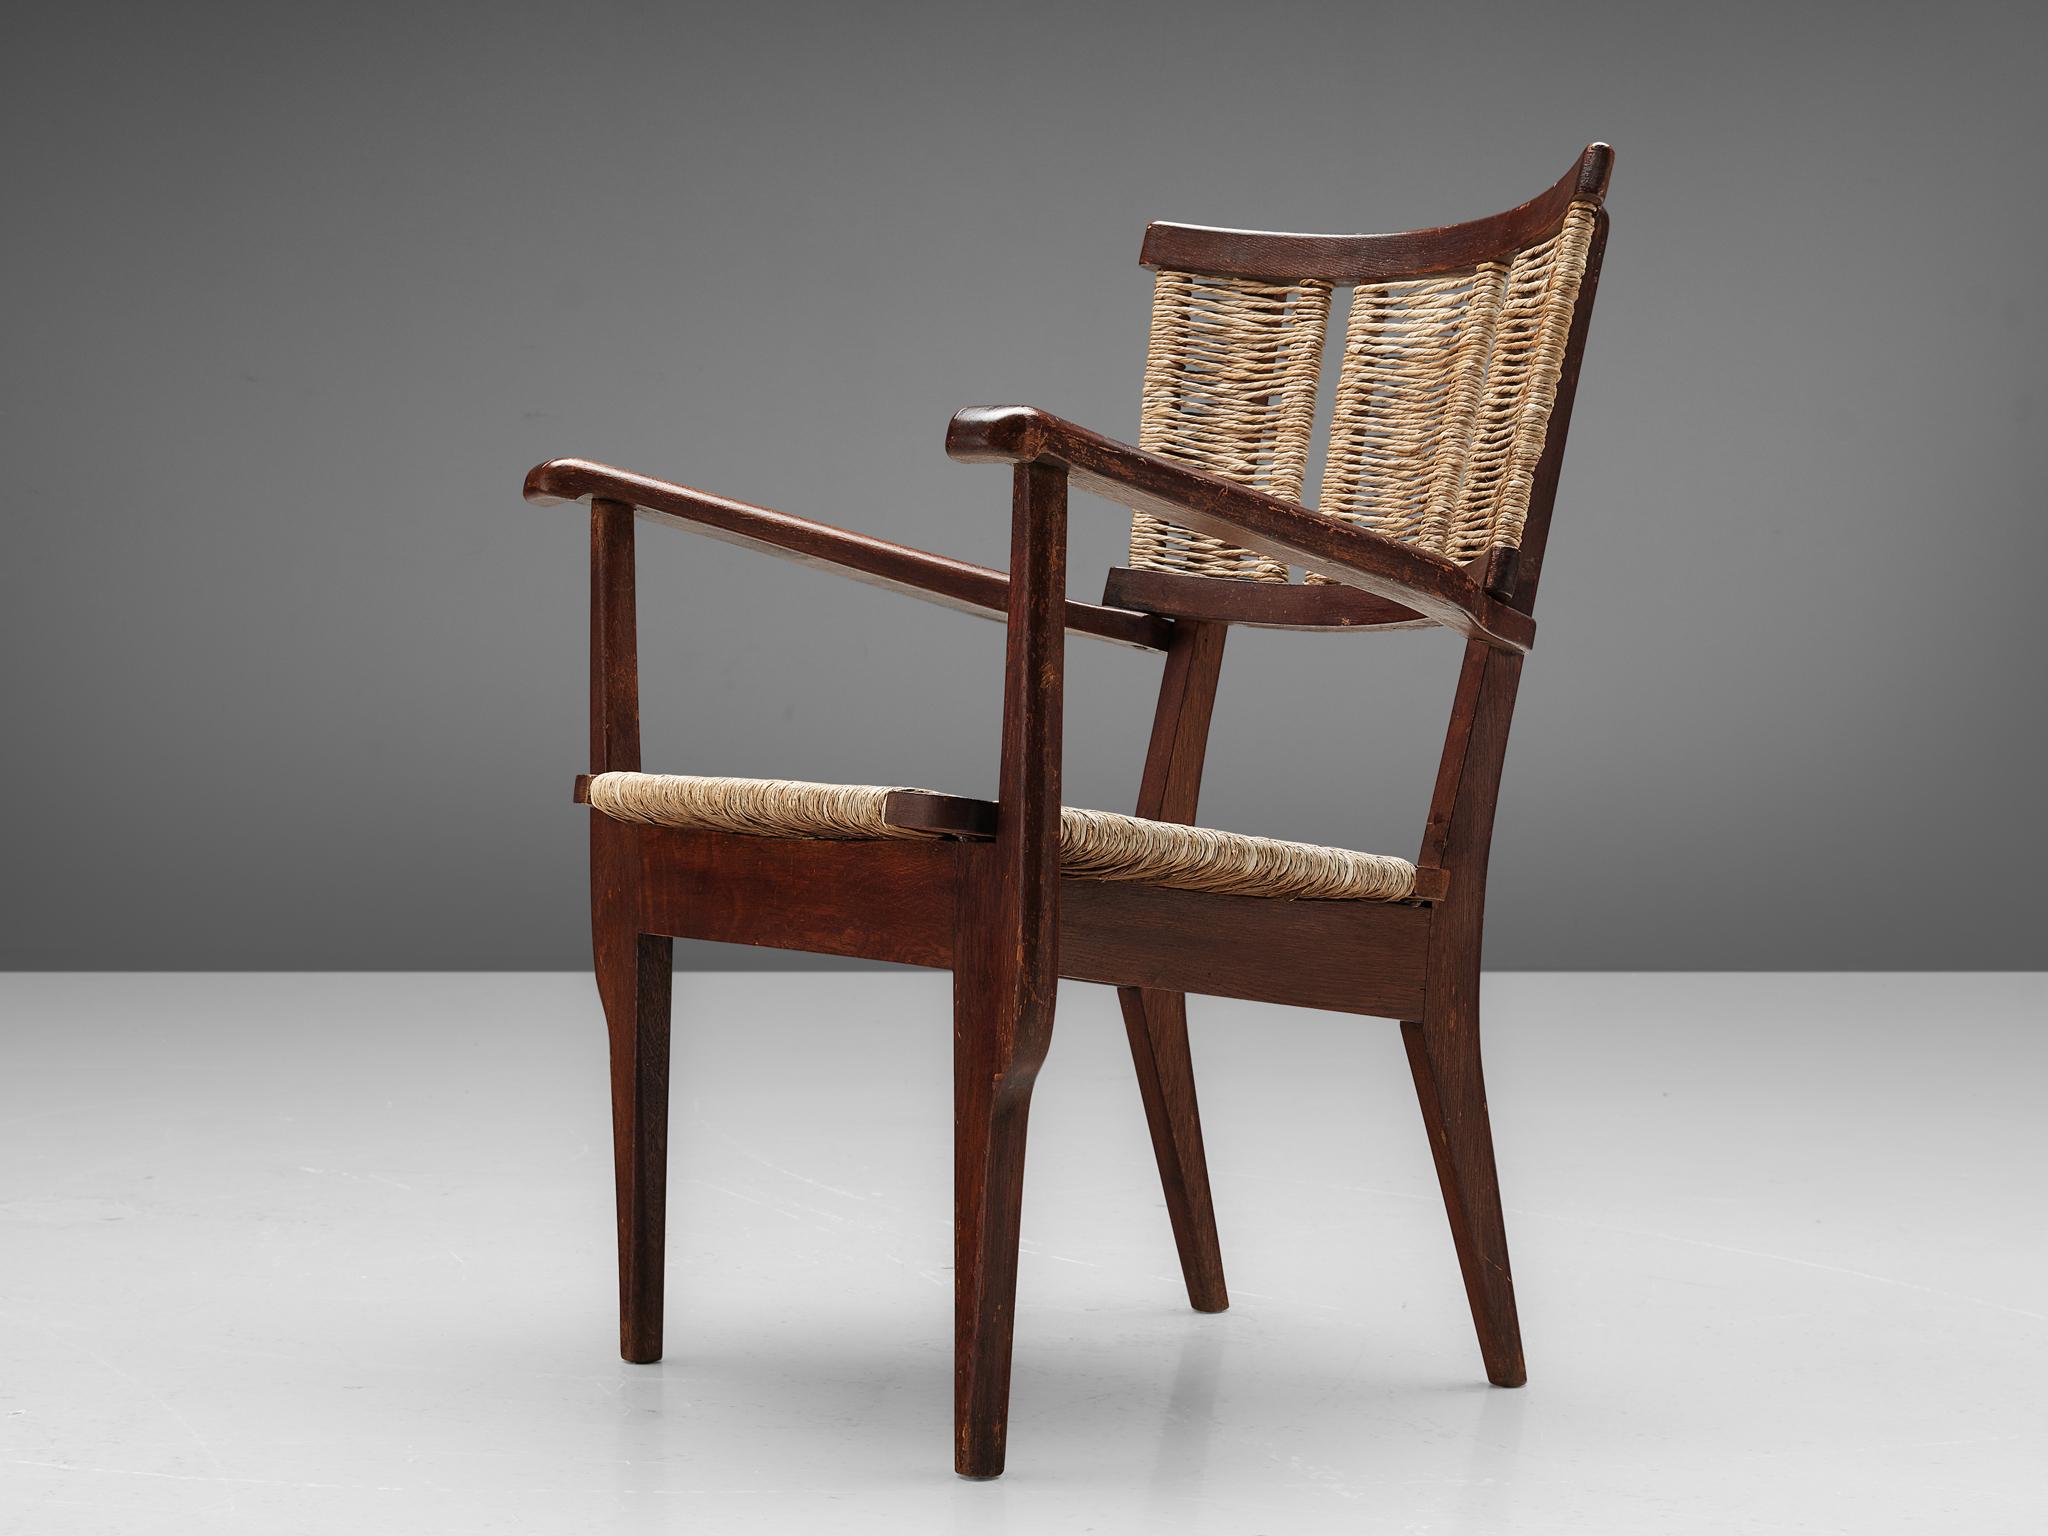 Mart Stam, armchair, oak, straw, The Netherlands, 1947. 

Elegant armchair in solid oak and woven straw. This chair shows the characteristic frame of the influential Dutch designer Mart Stam (1899-1986). The backrest and seat are covered with woven